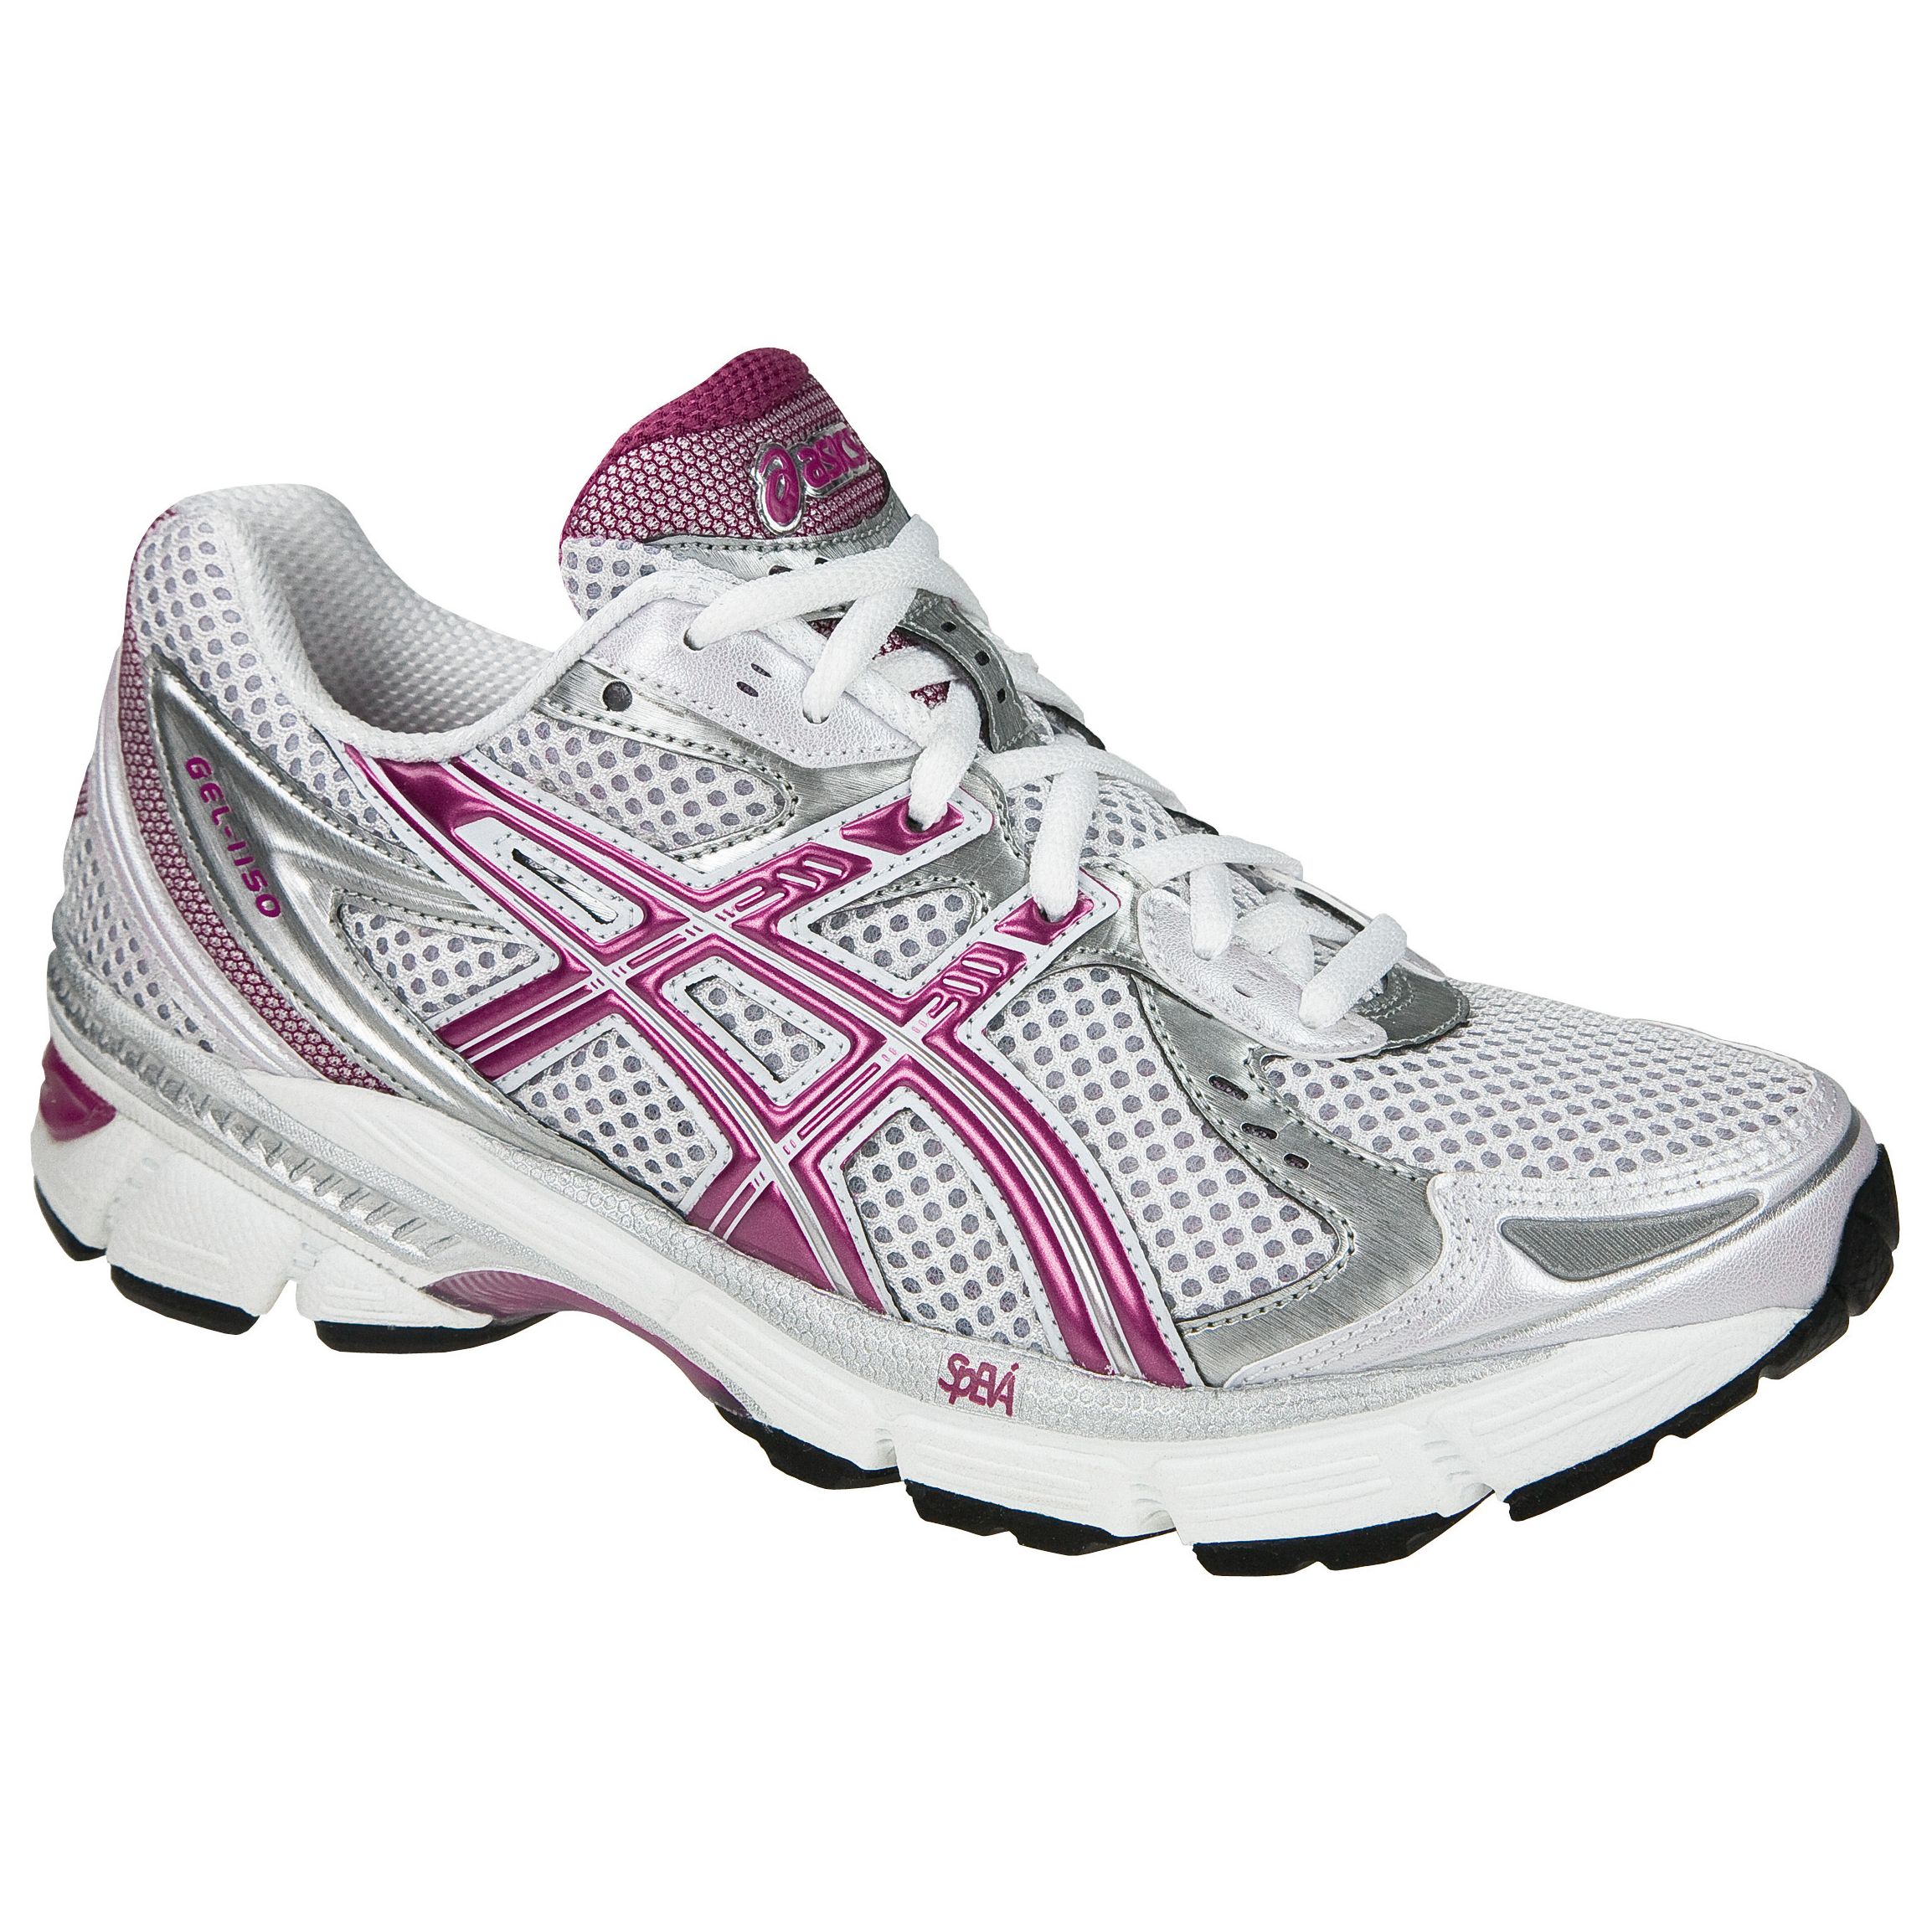 Asics Gel 1150 Running Shoes, White - review, compare prices, buy online